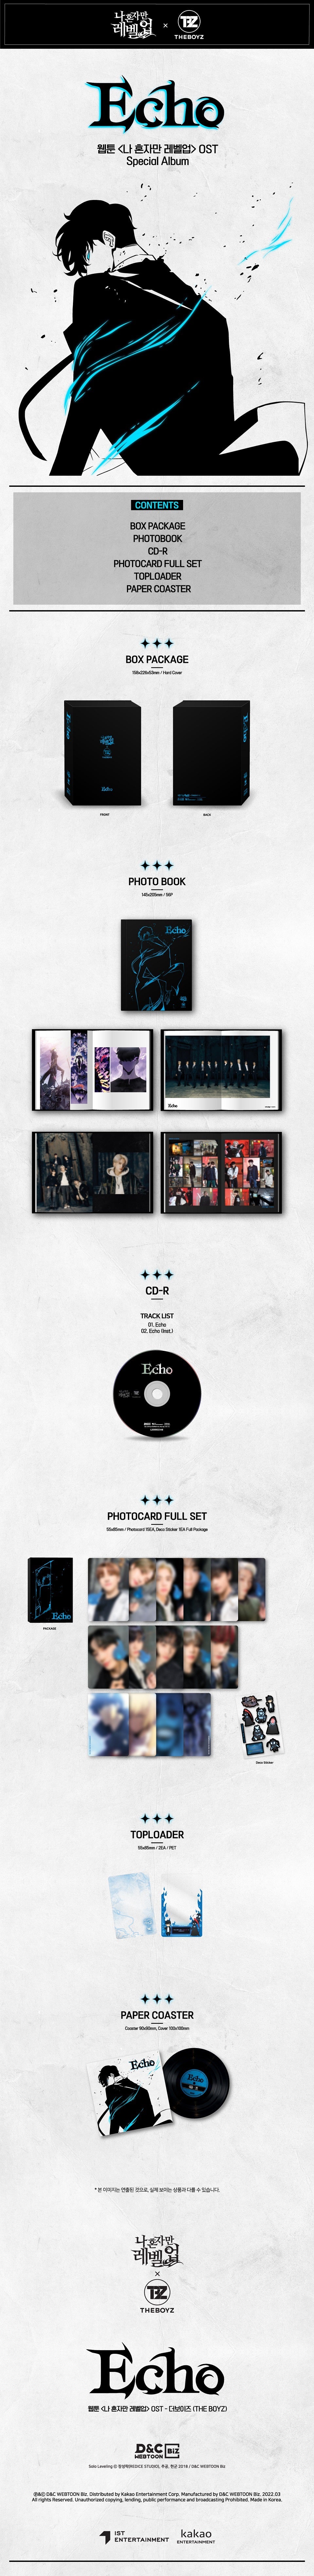 THE BOYZ X 'SOLO LEVELING' - SPECIAL OST ALBUM (ECHO) Infographic